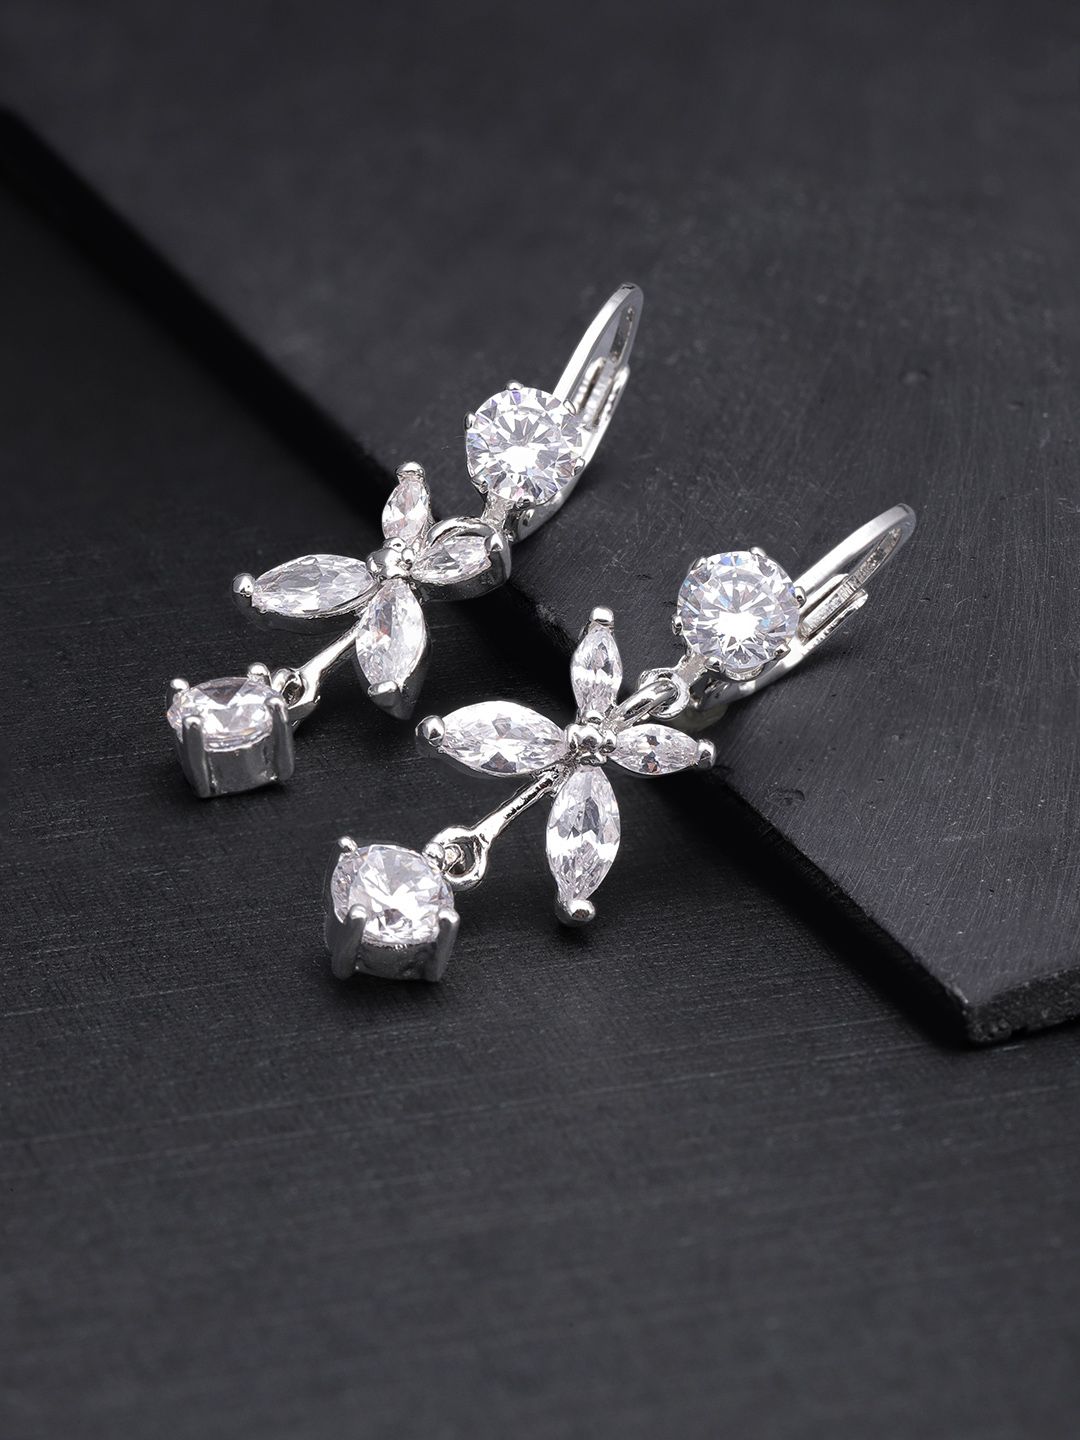 Priyaasi Silver-Toned Rhodium-Plated American Diamond Studded Floral Drop Earrings Price in India